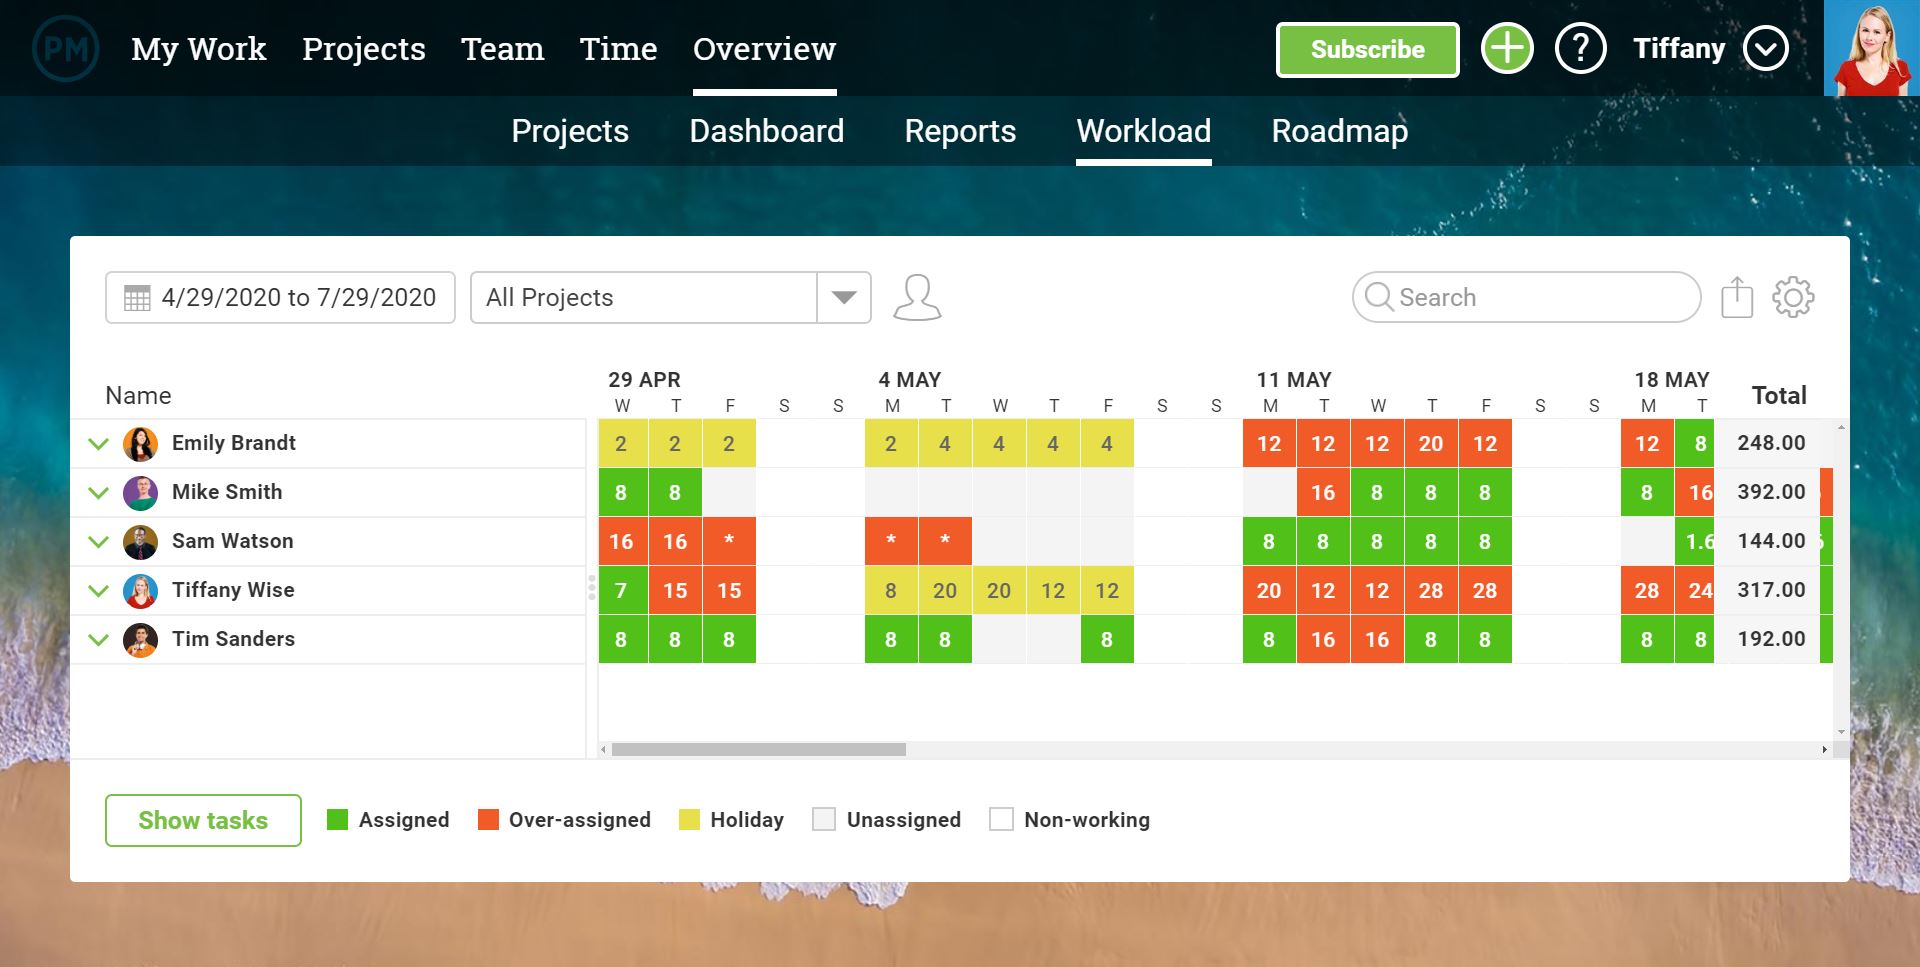 A screenshot of the resource management overview in ProjectManager.com, showing task assignees, task progress, and resource costs.